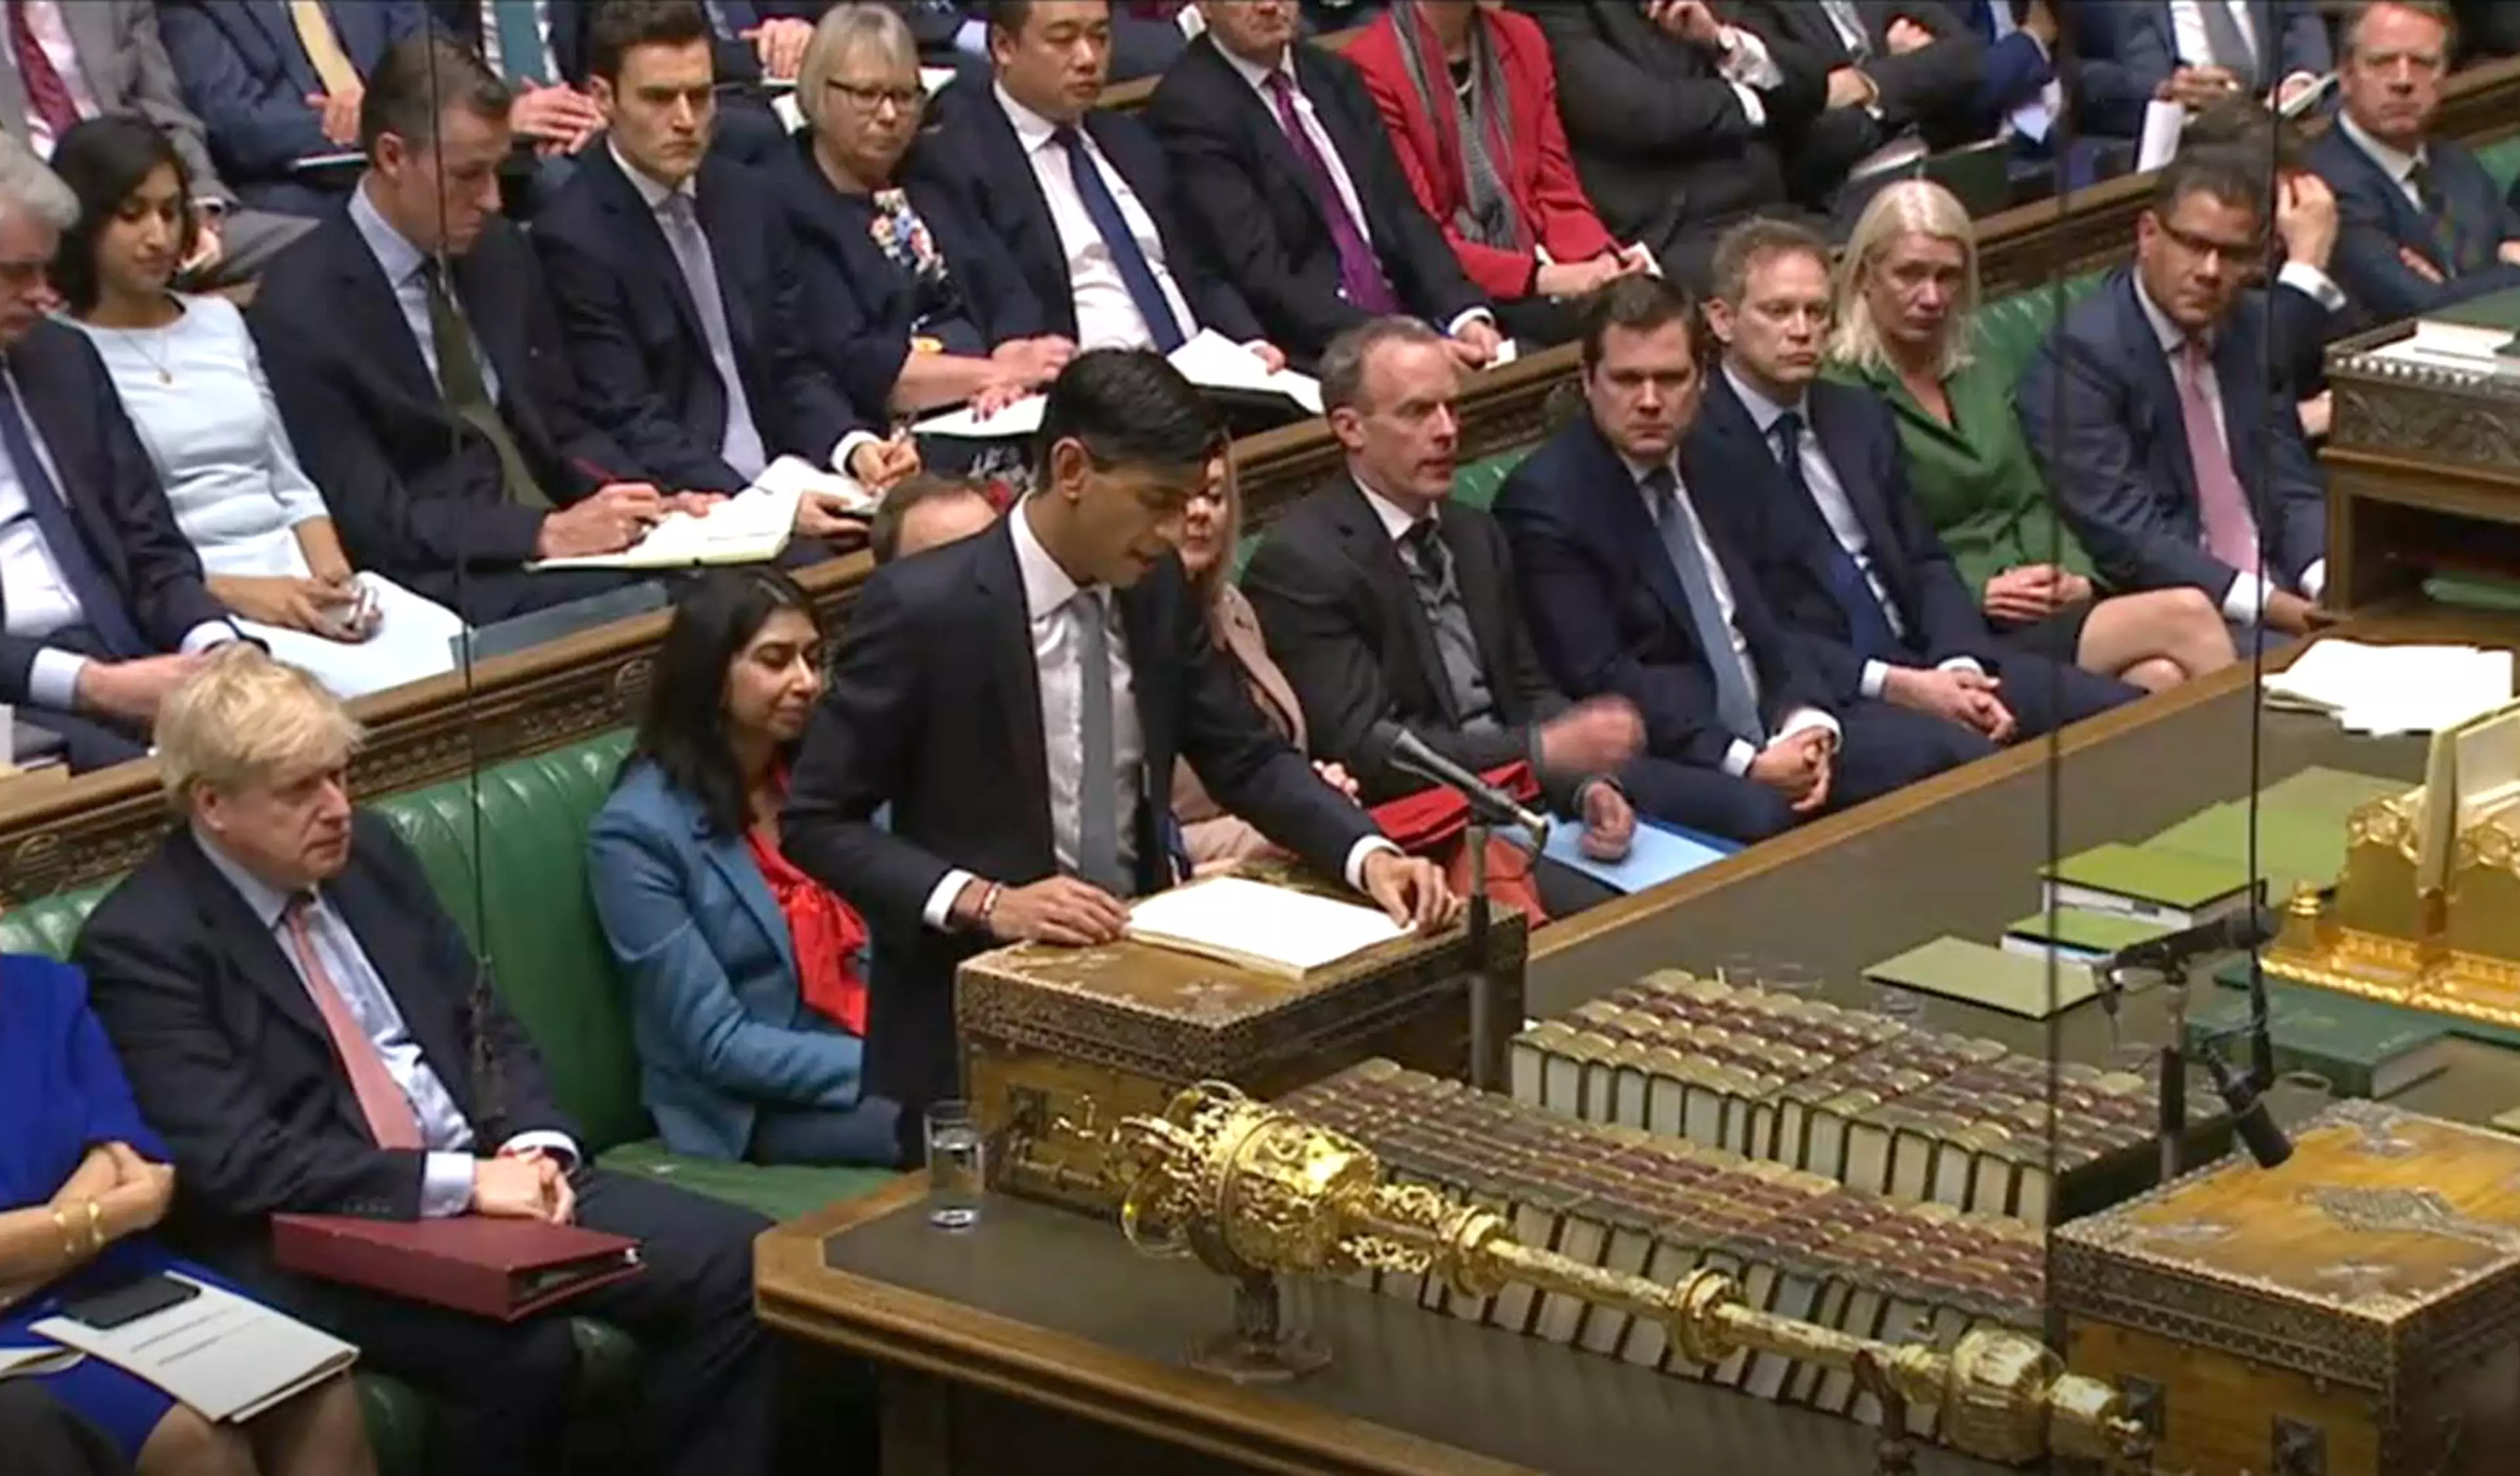 Chancellor Rishi Sunak delivering his first budget speech in the House of Commons.